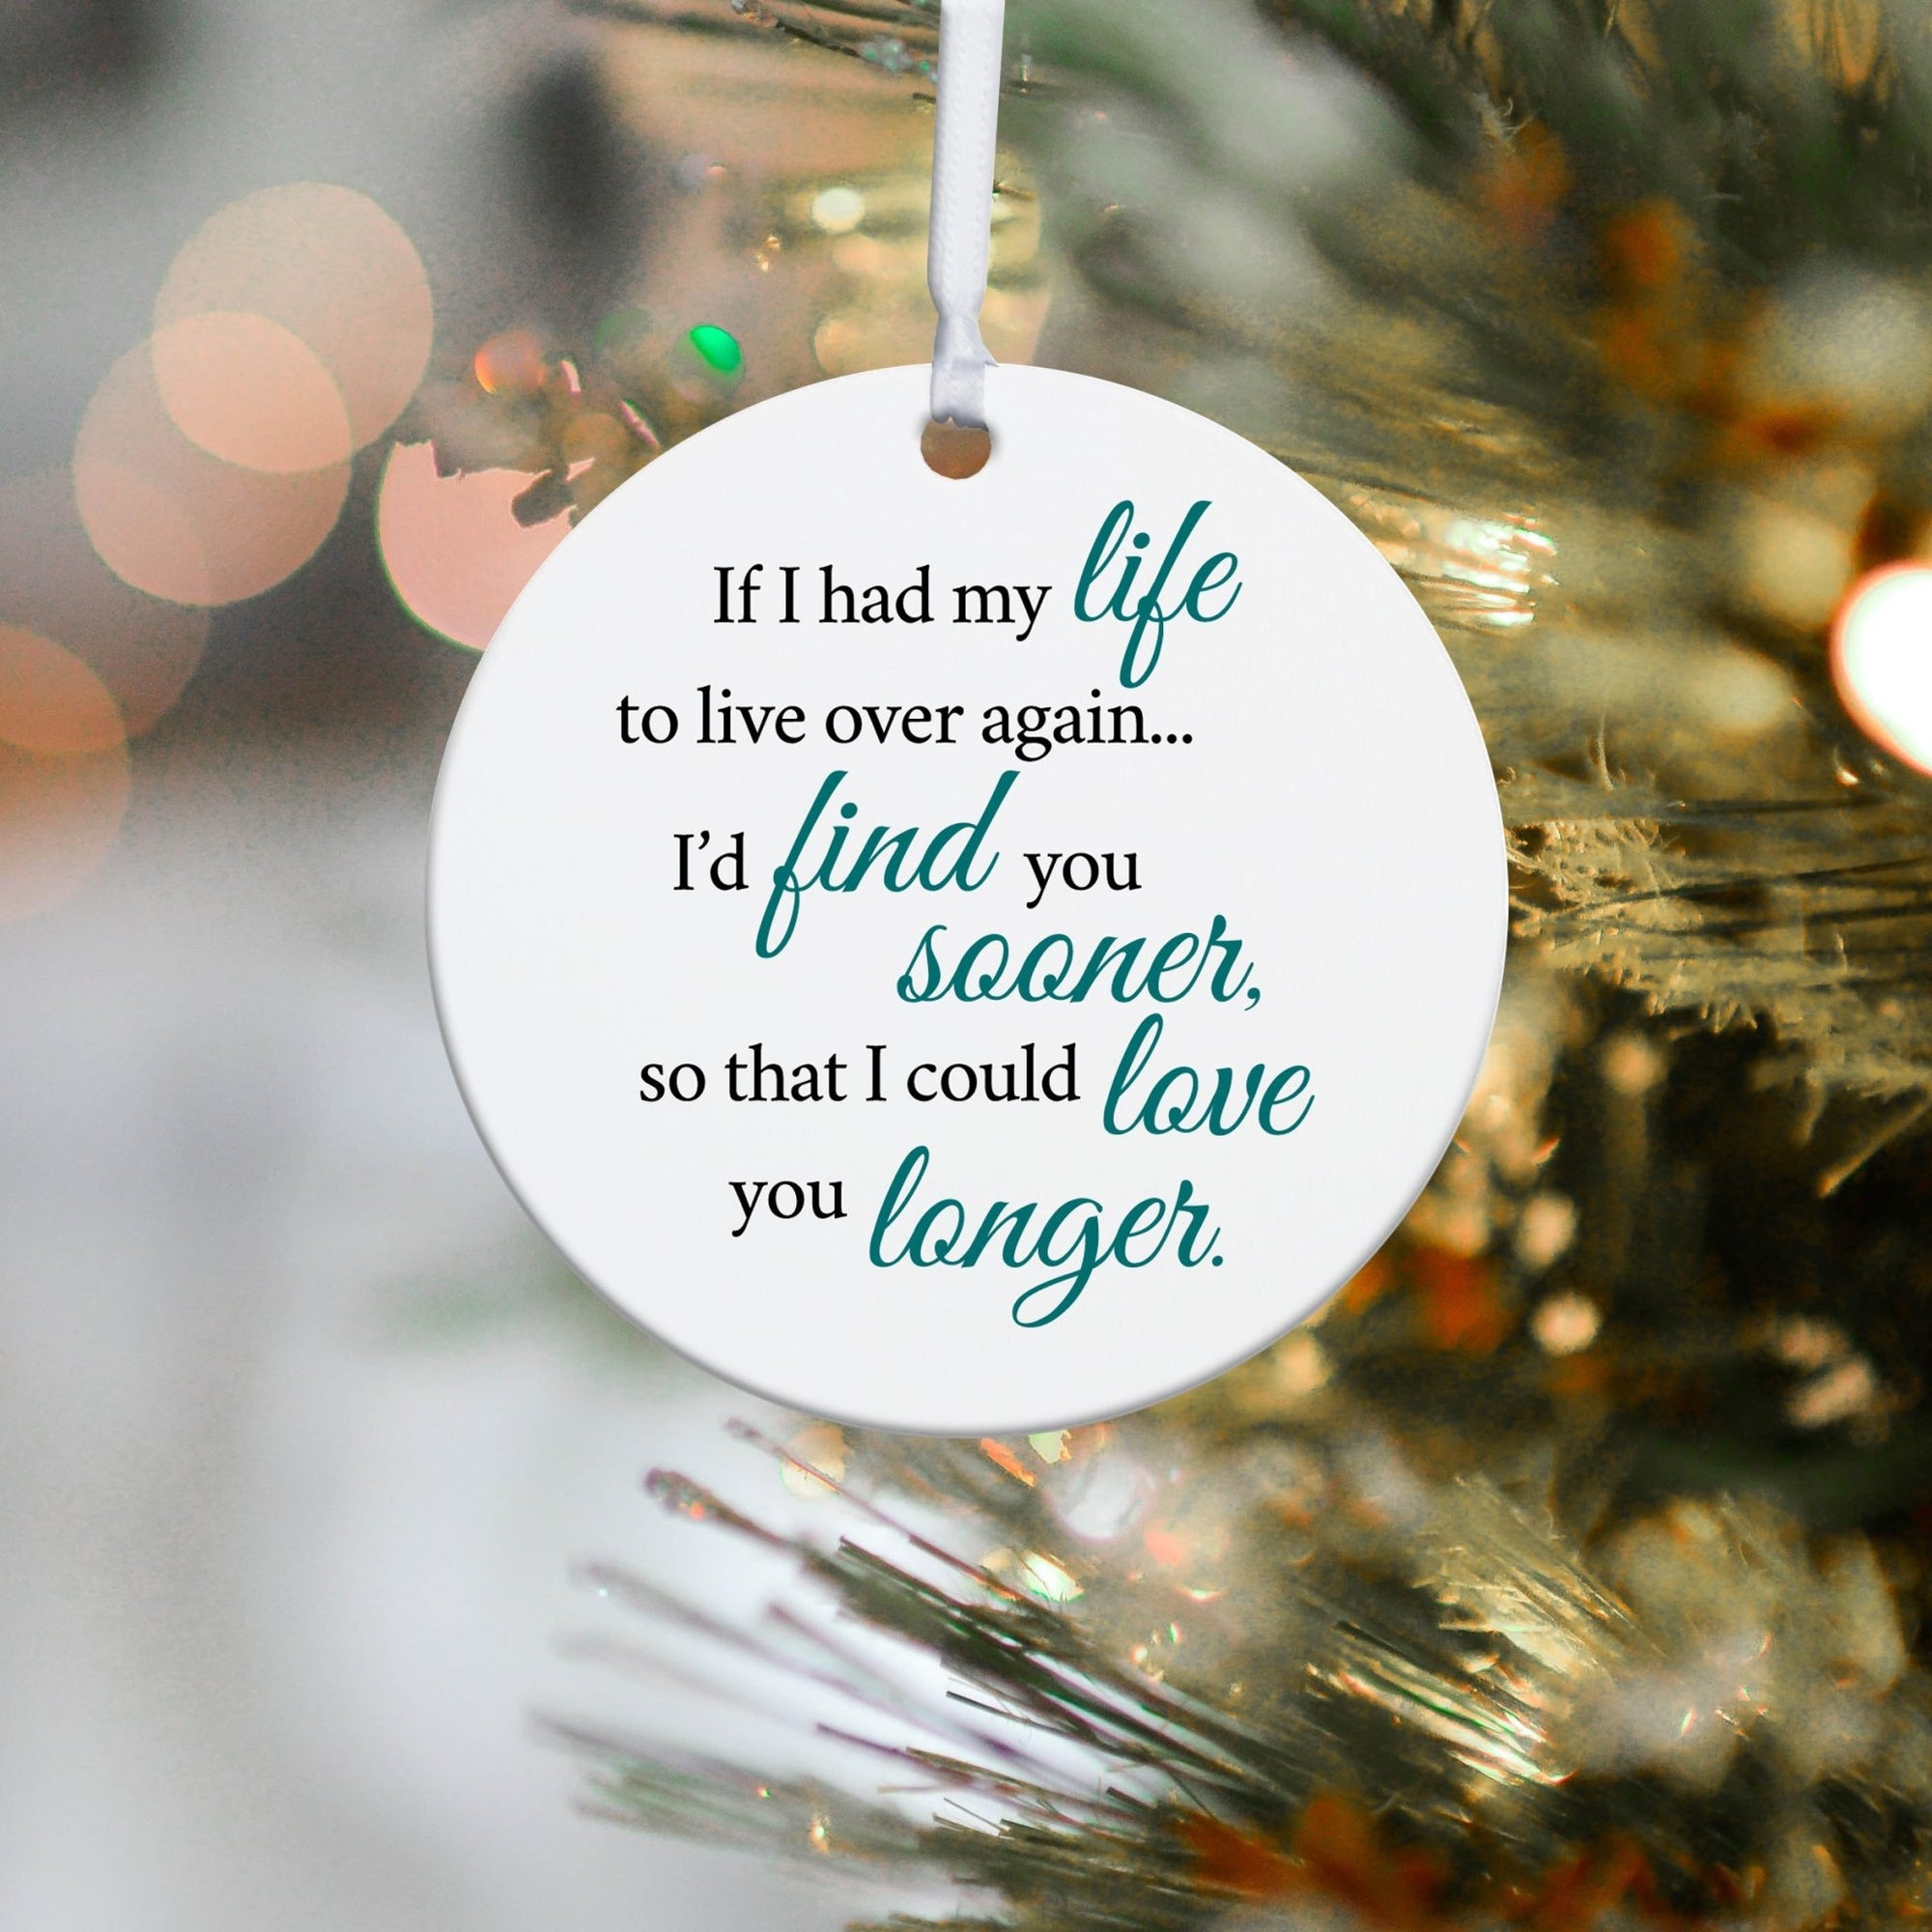 Husband / Boyfriend White Ornament With Inspirational Message Gift Ideas - If I Had My Life To Live Over Again… - LifeSong Milestones